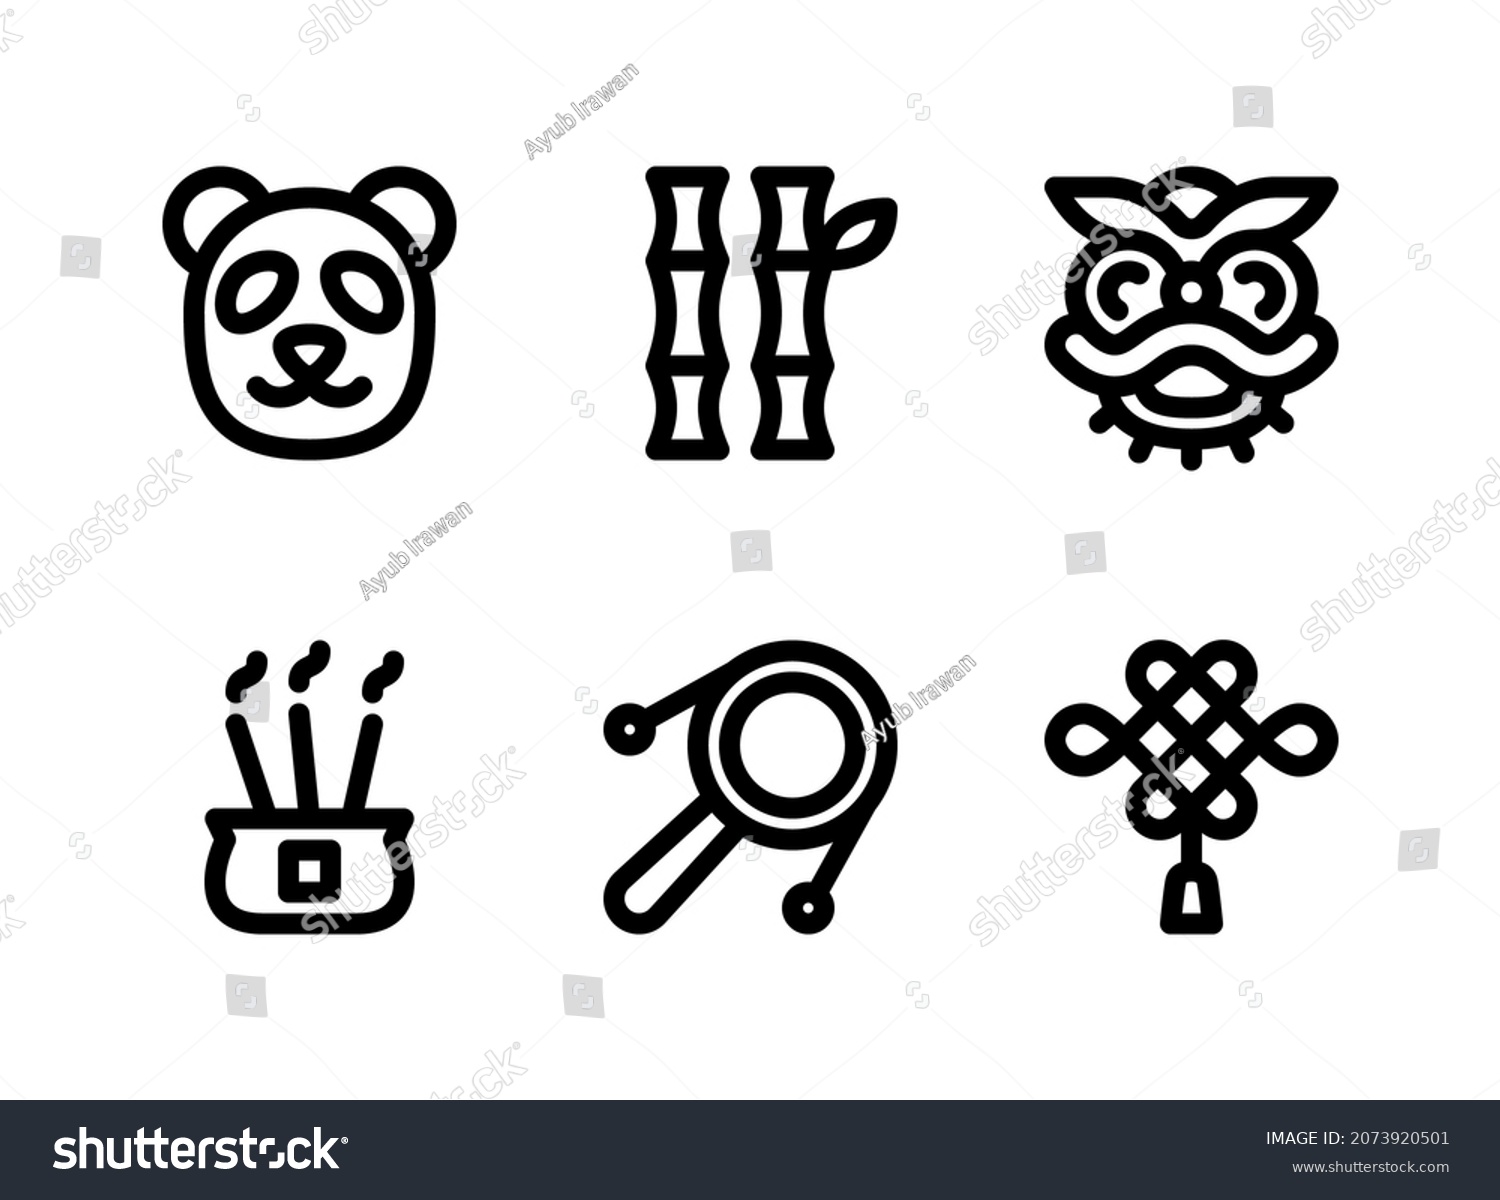 SVG of Simple Set of Real Estate Related Vector Line Icons. Contains Icons as Panda, Bamboo, Lion Dance and more. svg